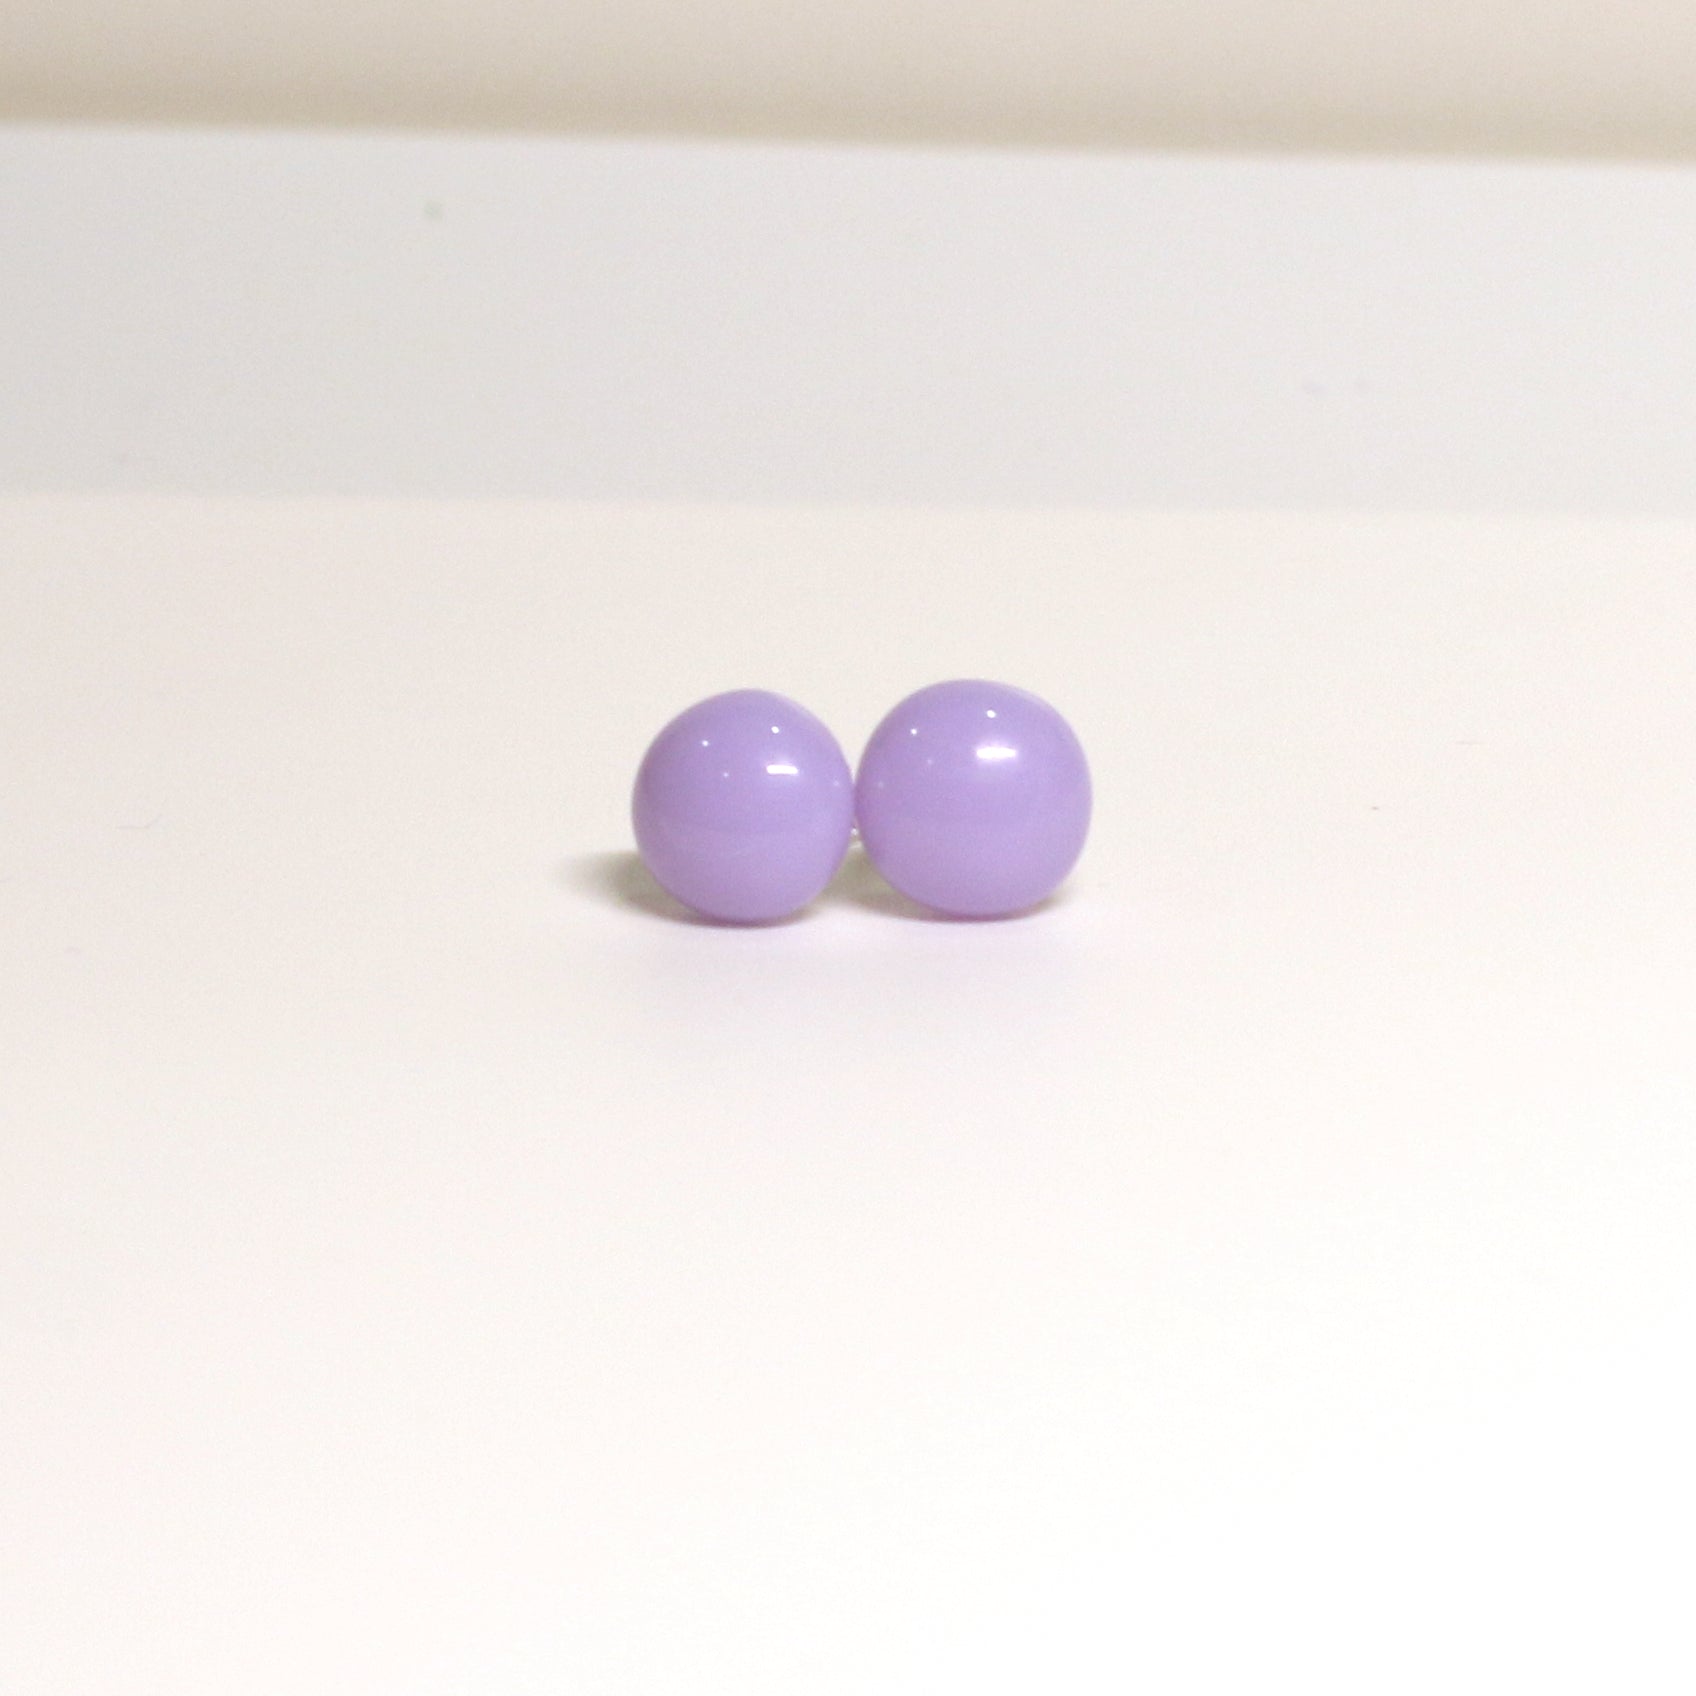 Small Fused Glass Earring Studs - 3829